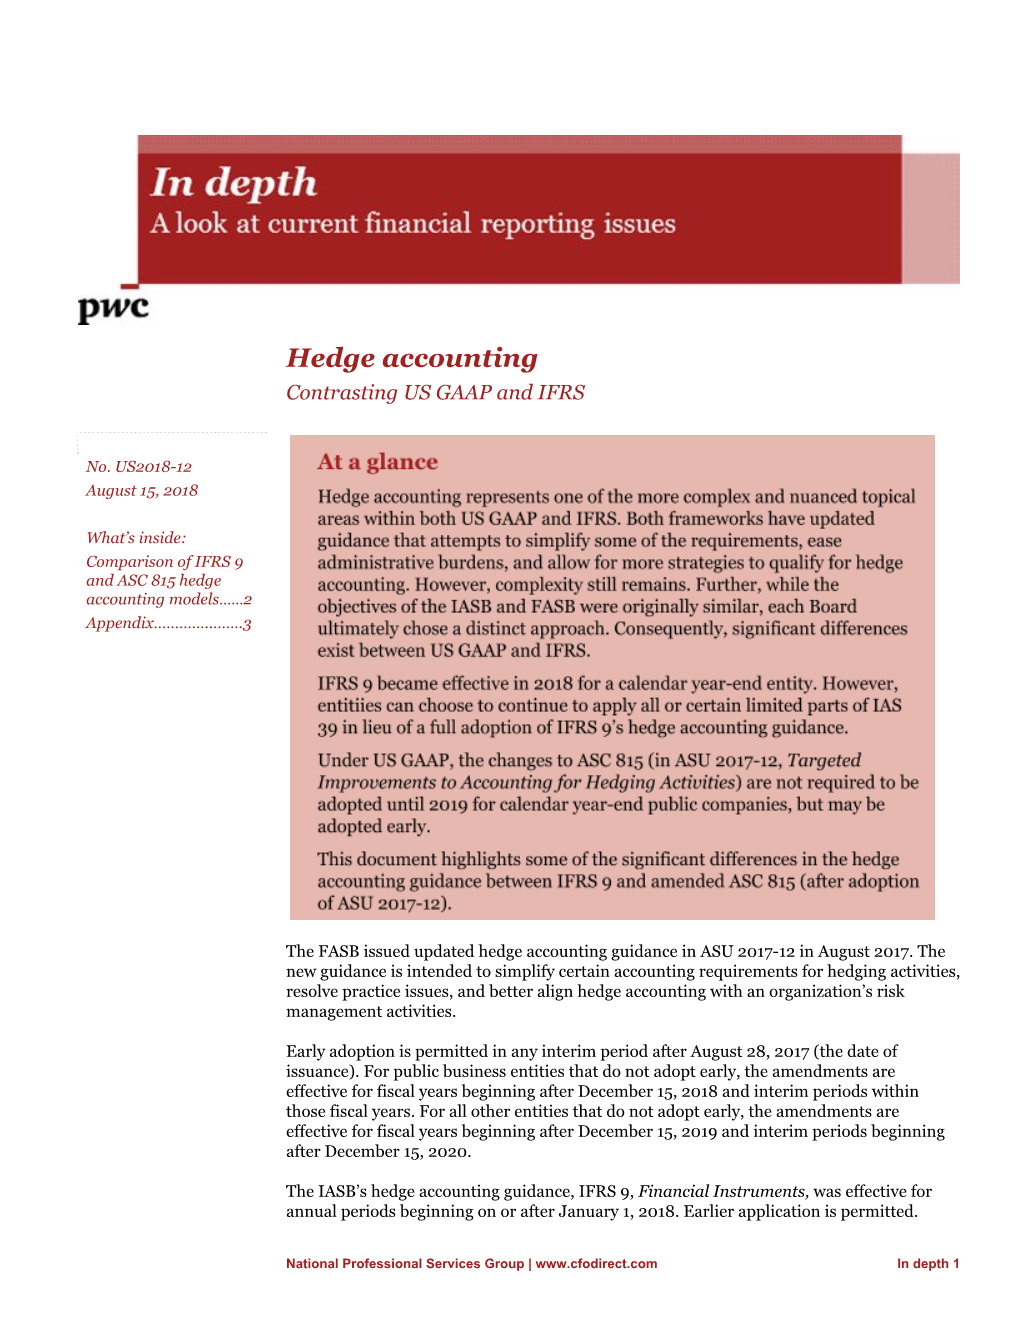 Hedge Accounting Contrasting US GAAP and IFRS